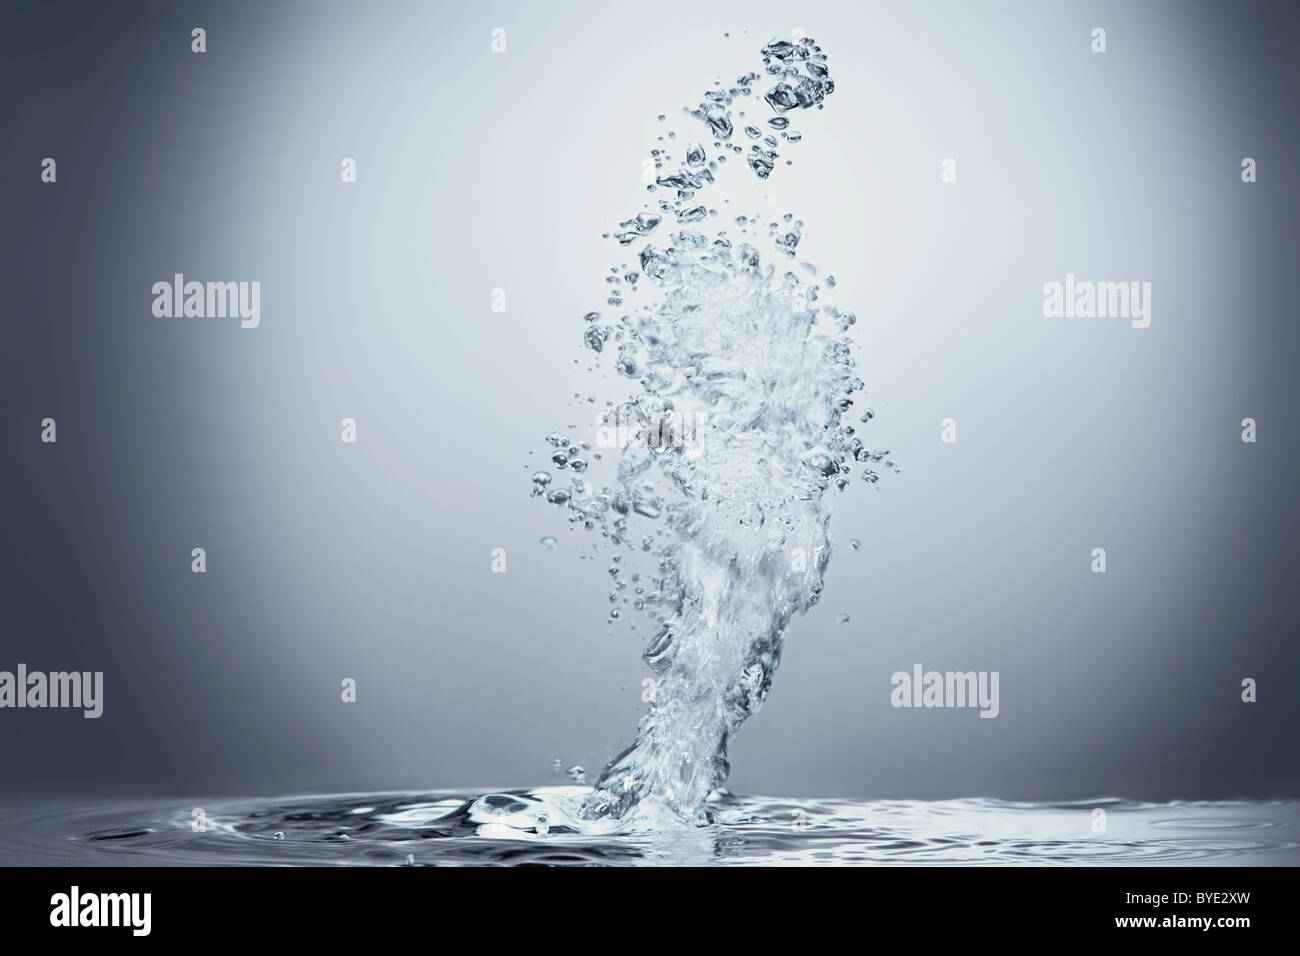 Air bubbles bubbling in water Stock Photo